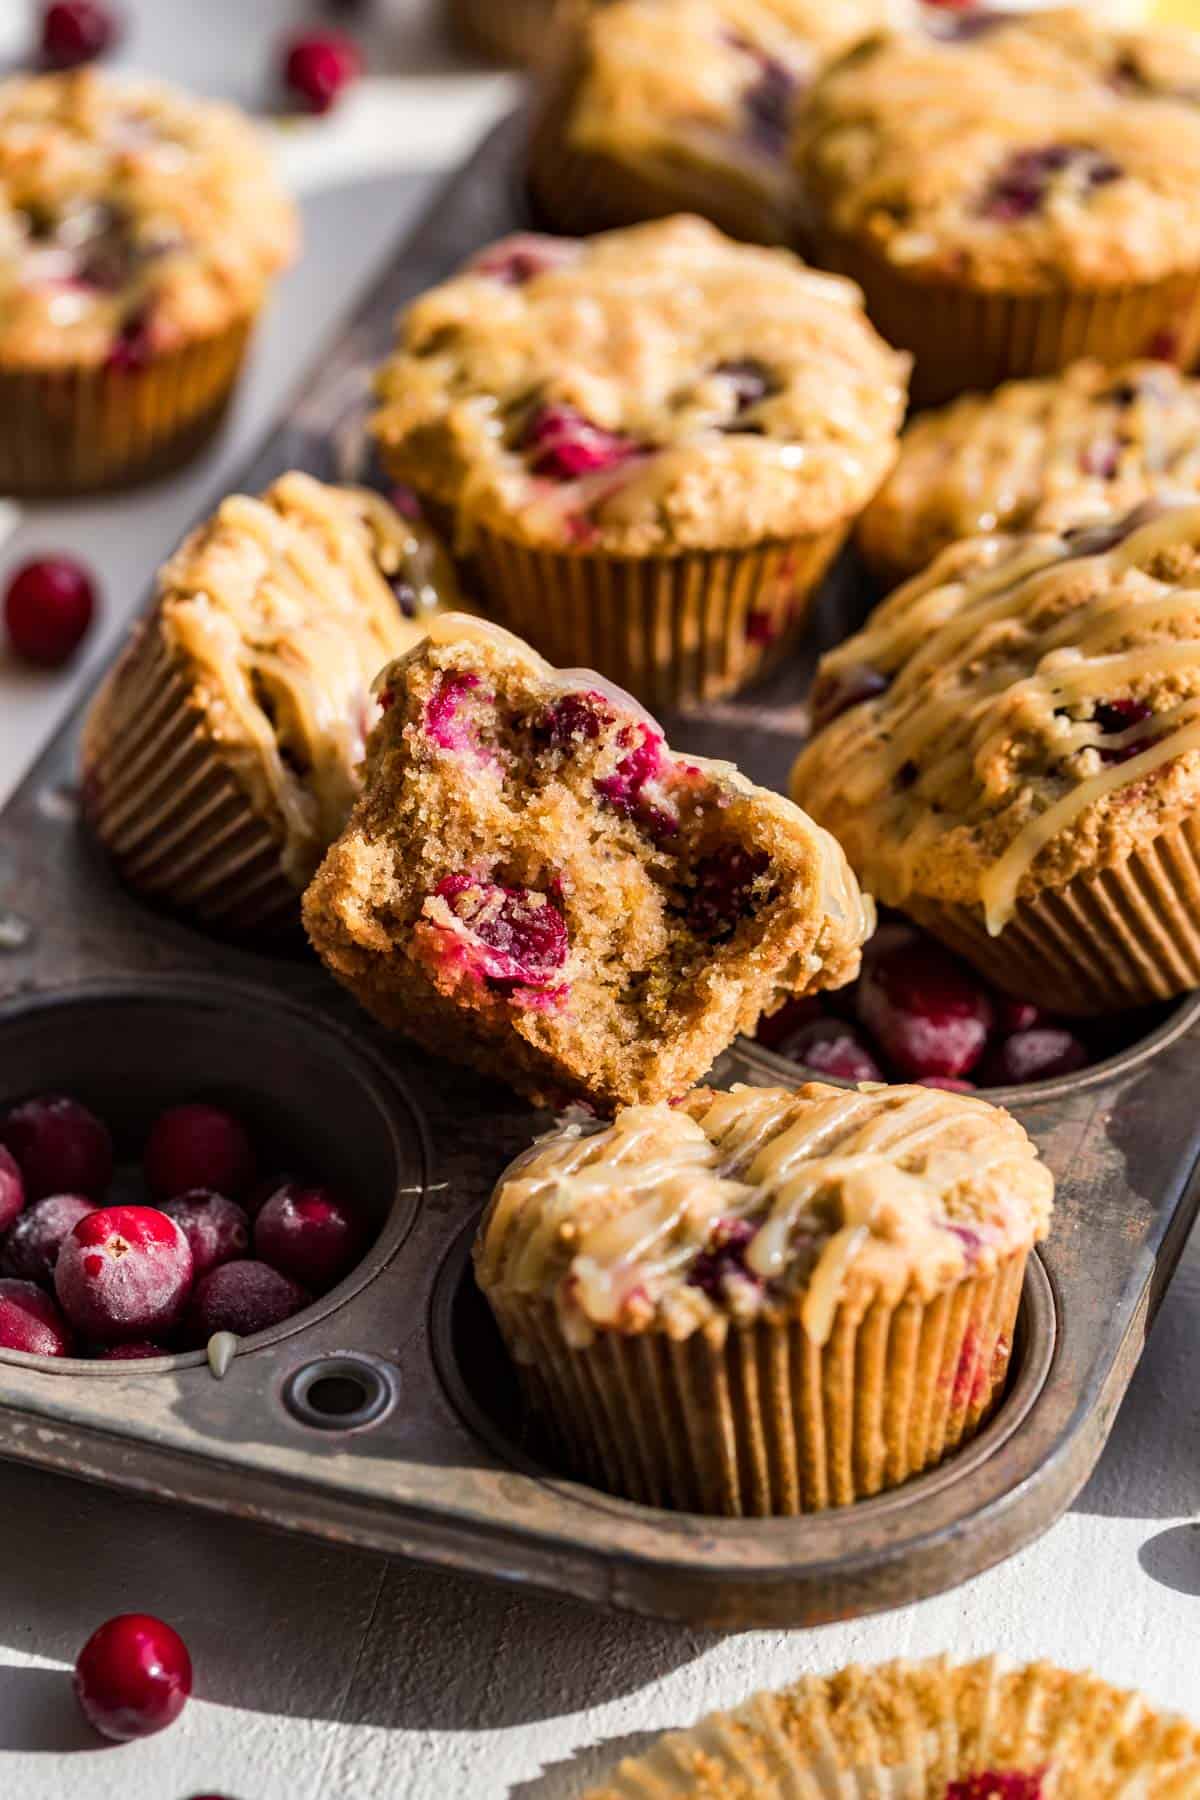 Cranberry Orange Muffins in an antique muffin tin with one muffin broken open showing the fluffy texture.